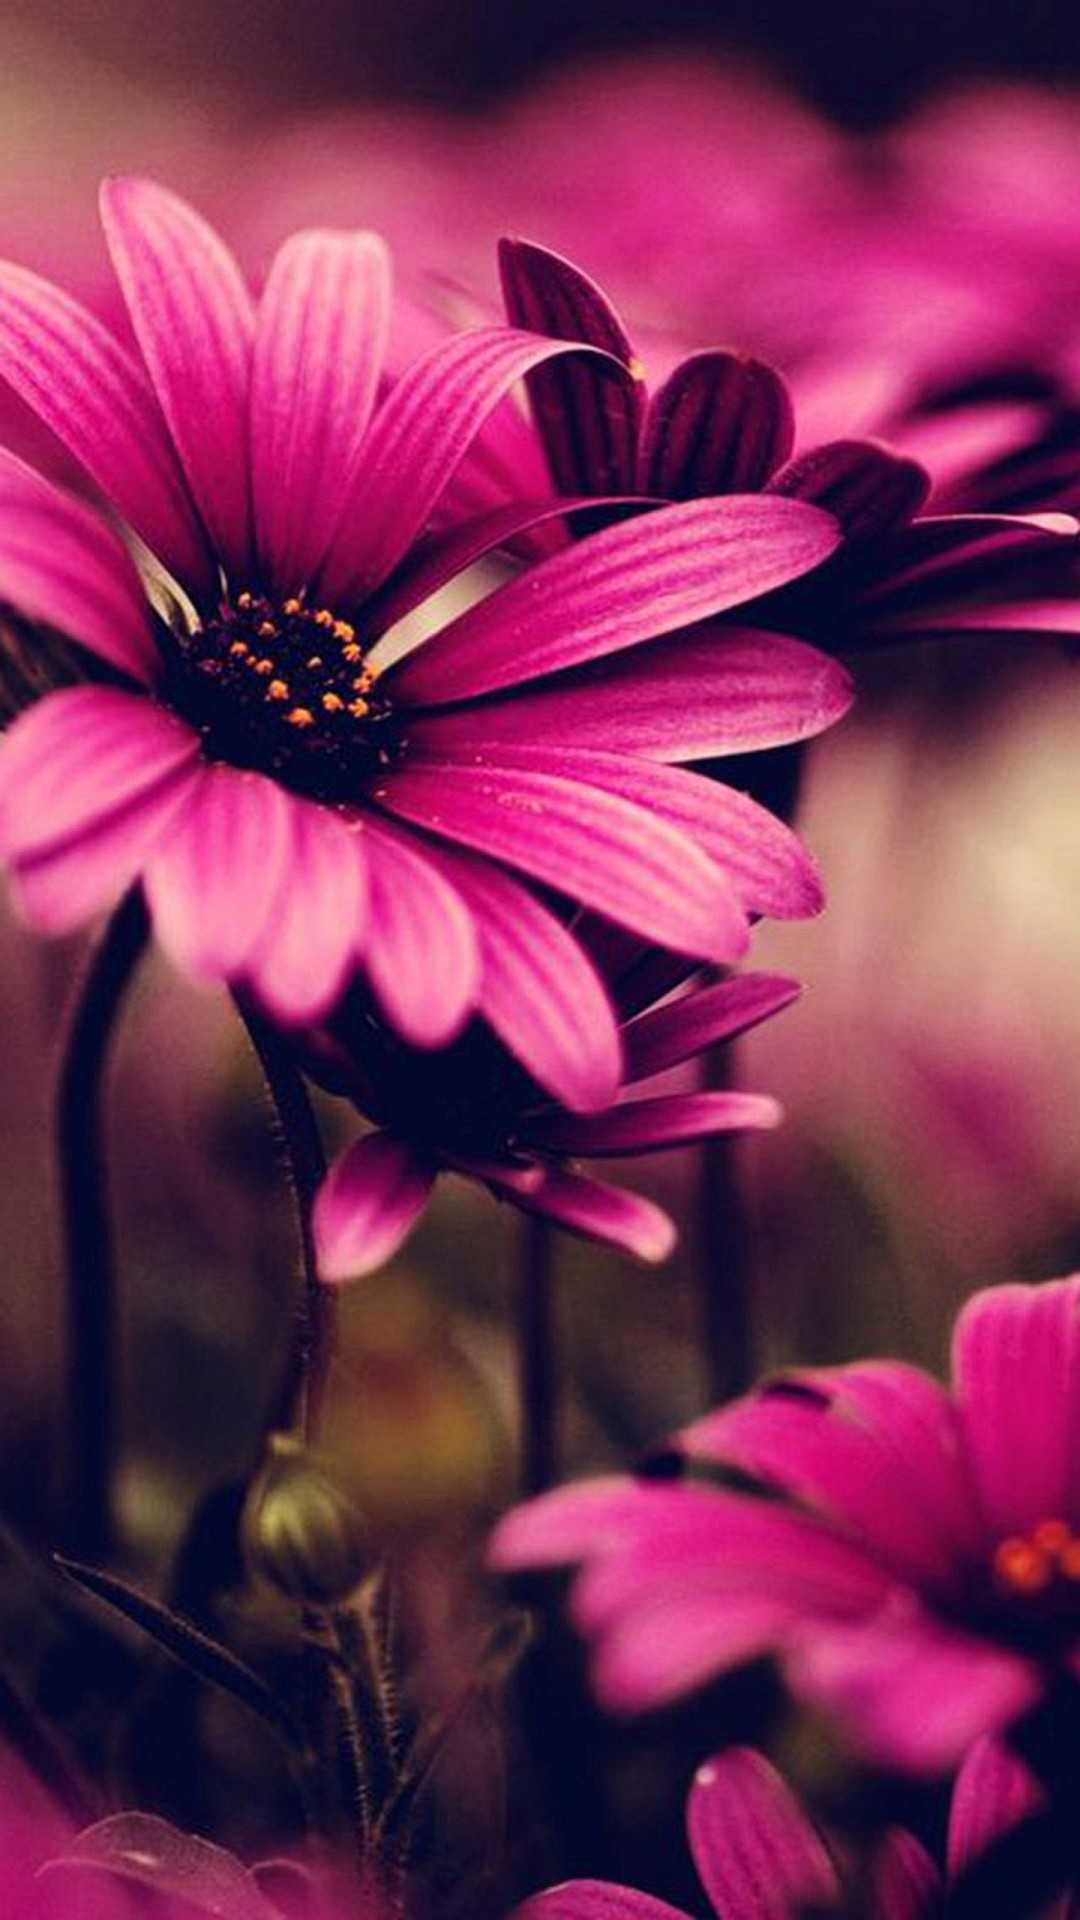 Flower Iphone Hd Wallpapers Top Free Flower Iphone Hd Backgrounds